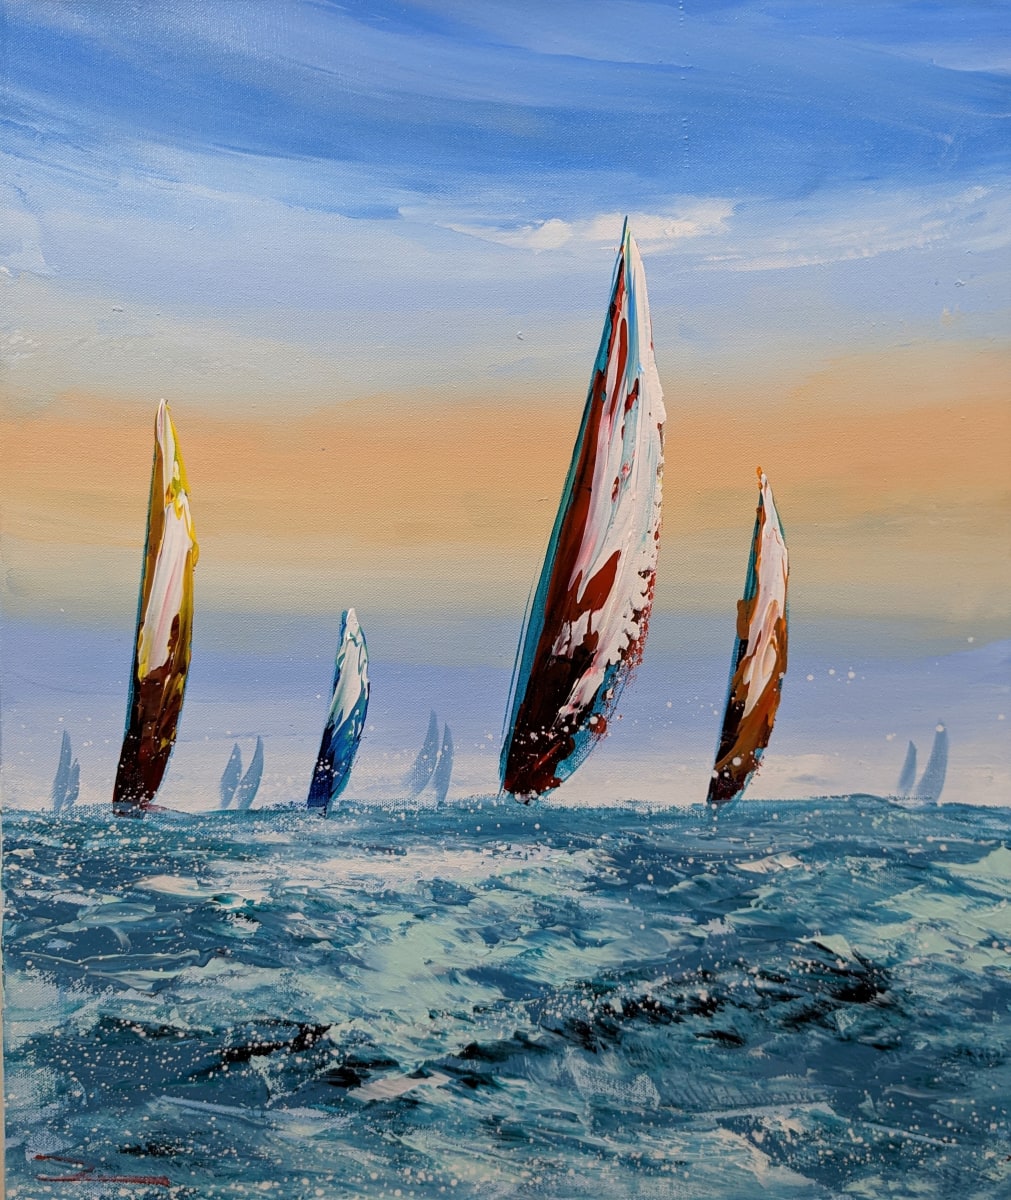 Sailing by Rosa Chavez  Image: Sailing by Rosa Chevez